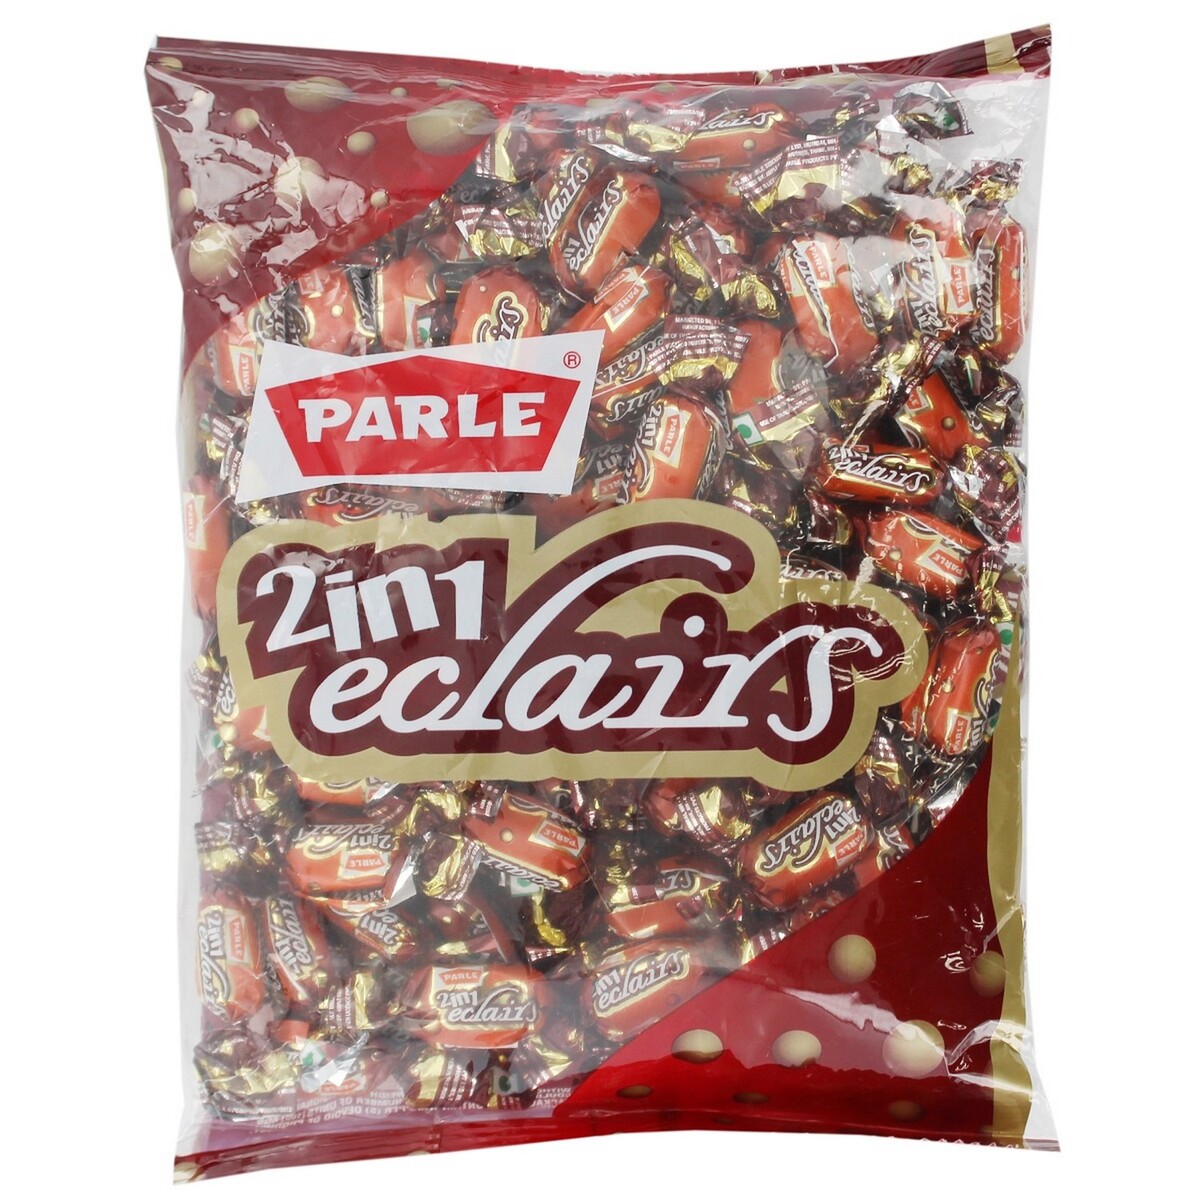 Parle 2 in 1 Eclairs 241gm